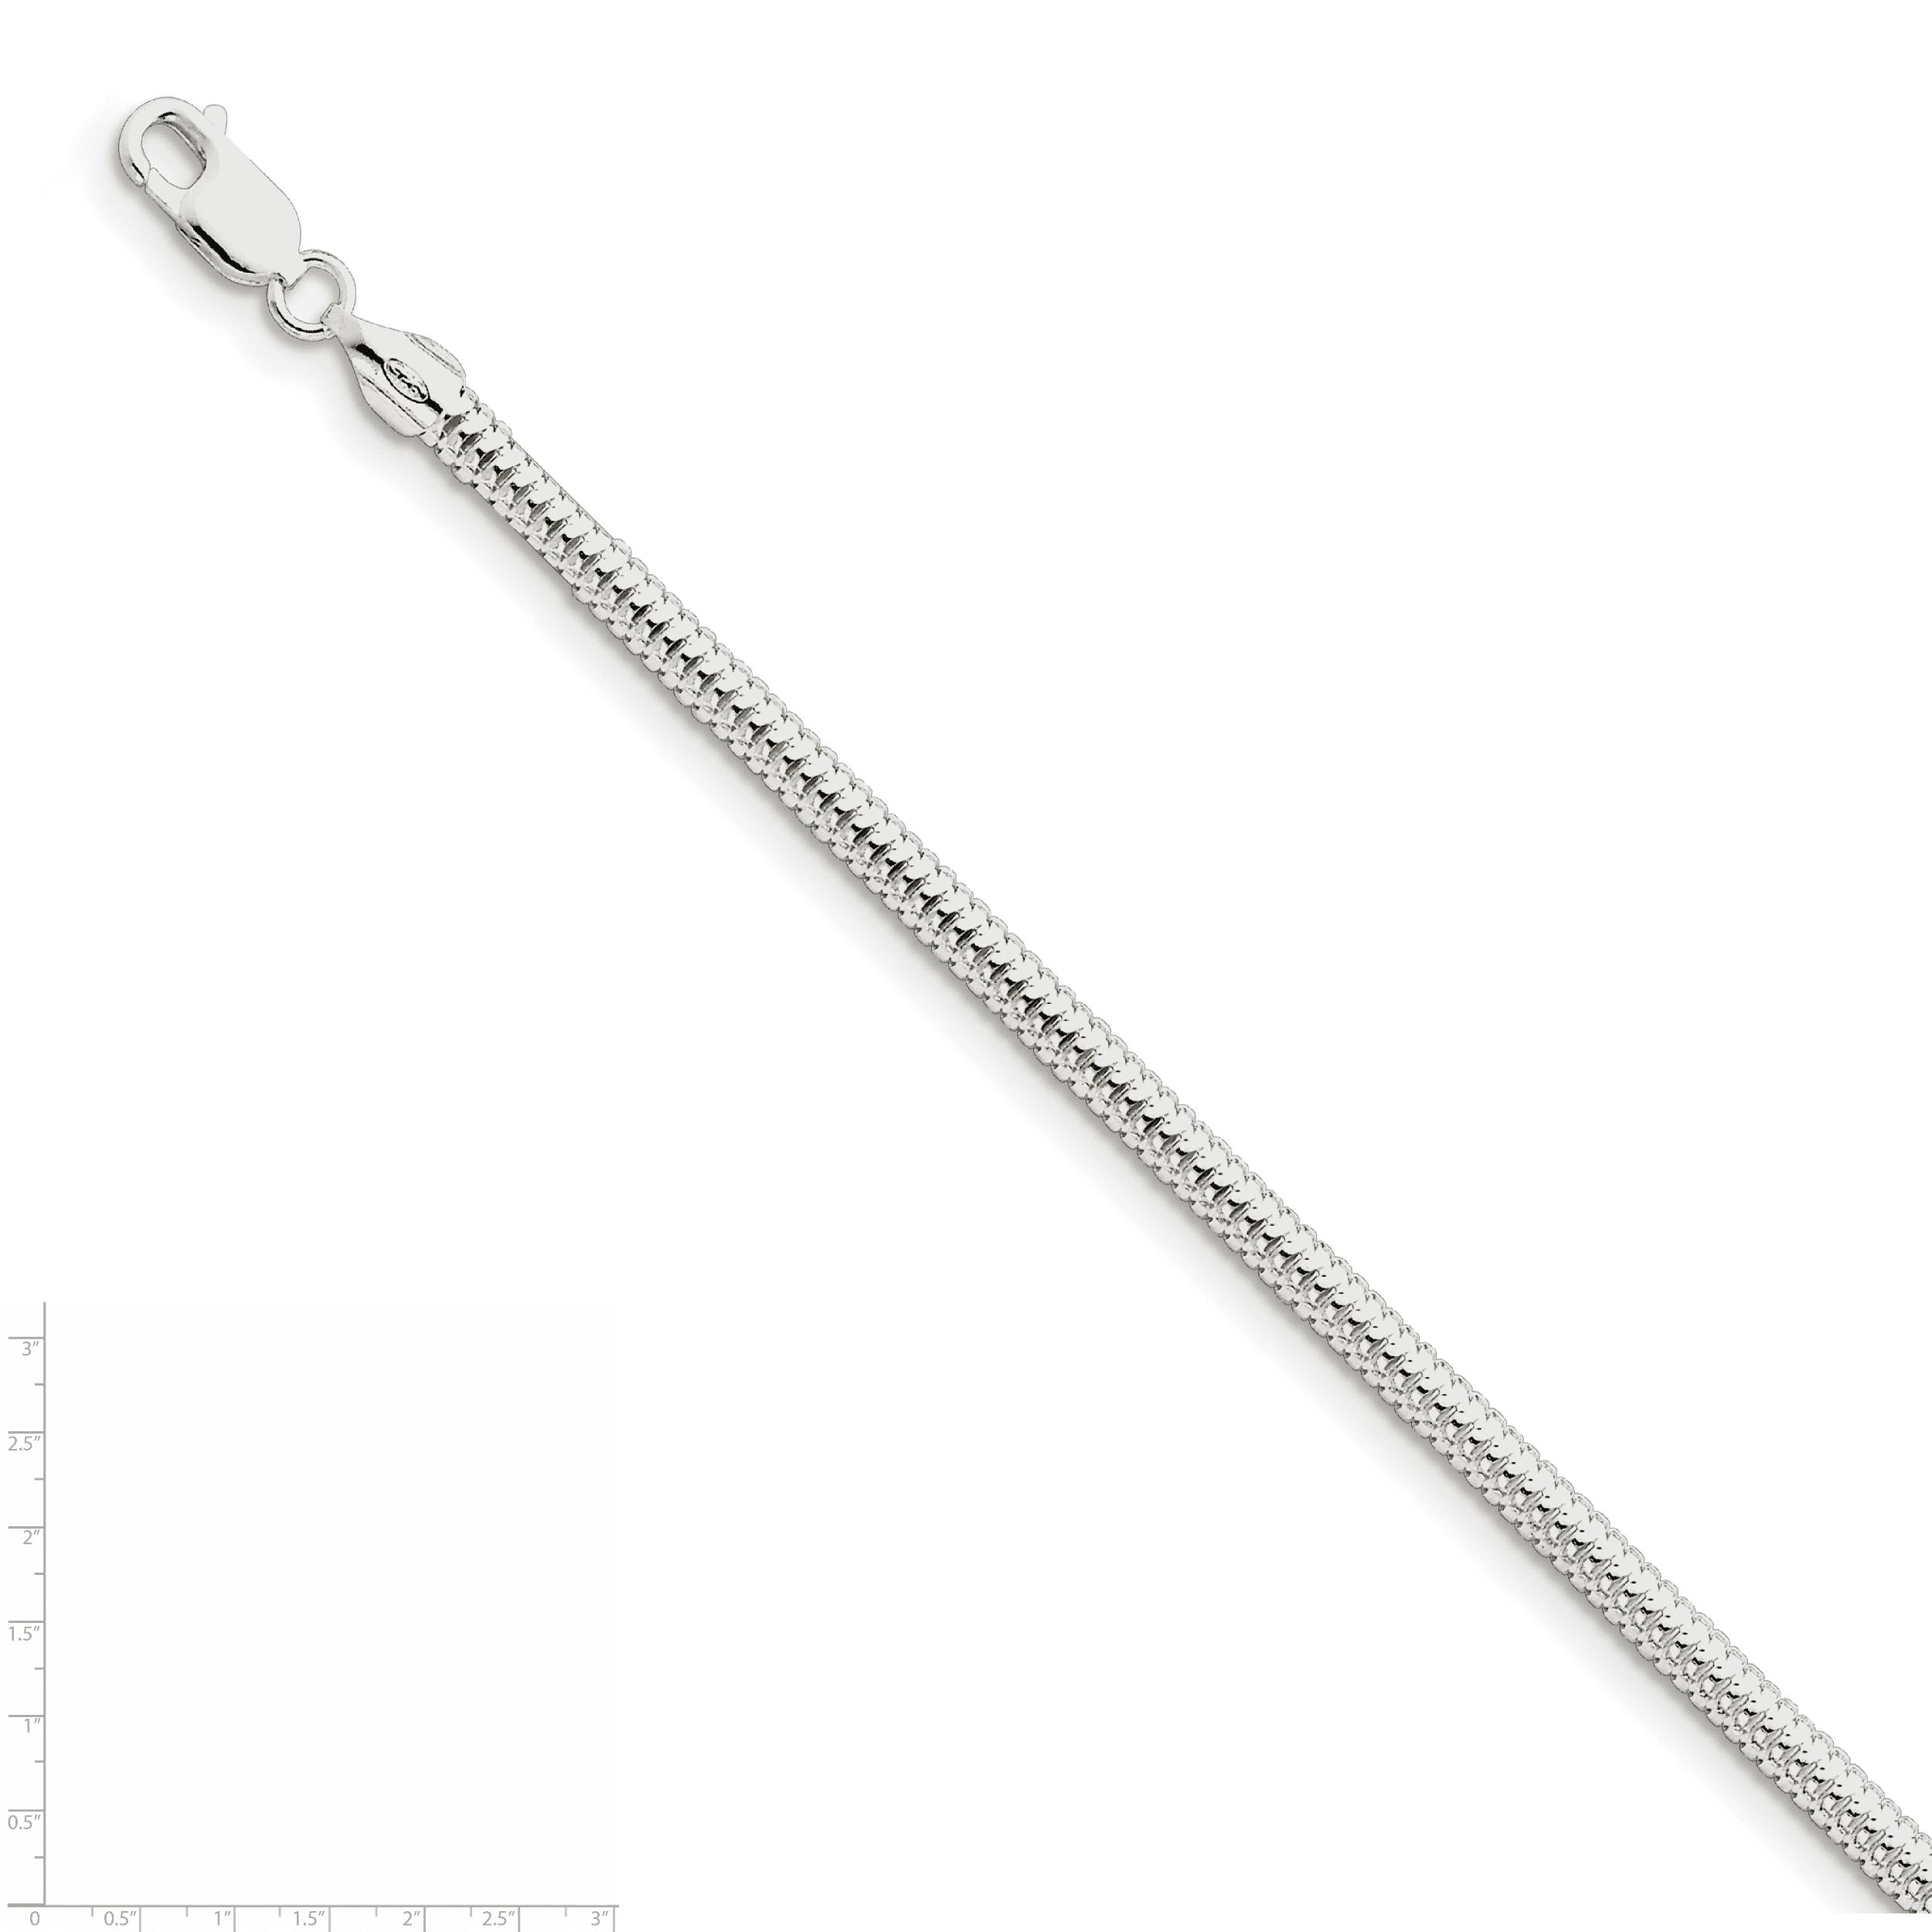 H&Beautimer Classic Unisex 925 Sterling Silver Necklace 3-4MM Round Snake  Chain Necklace for Men Women - Party Fine Jewelry - Original Silver Link